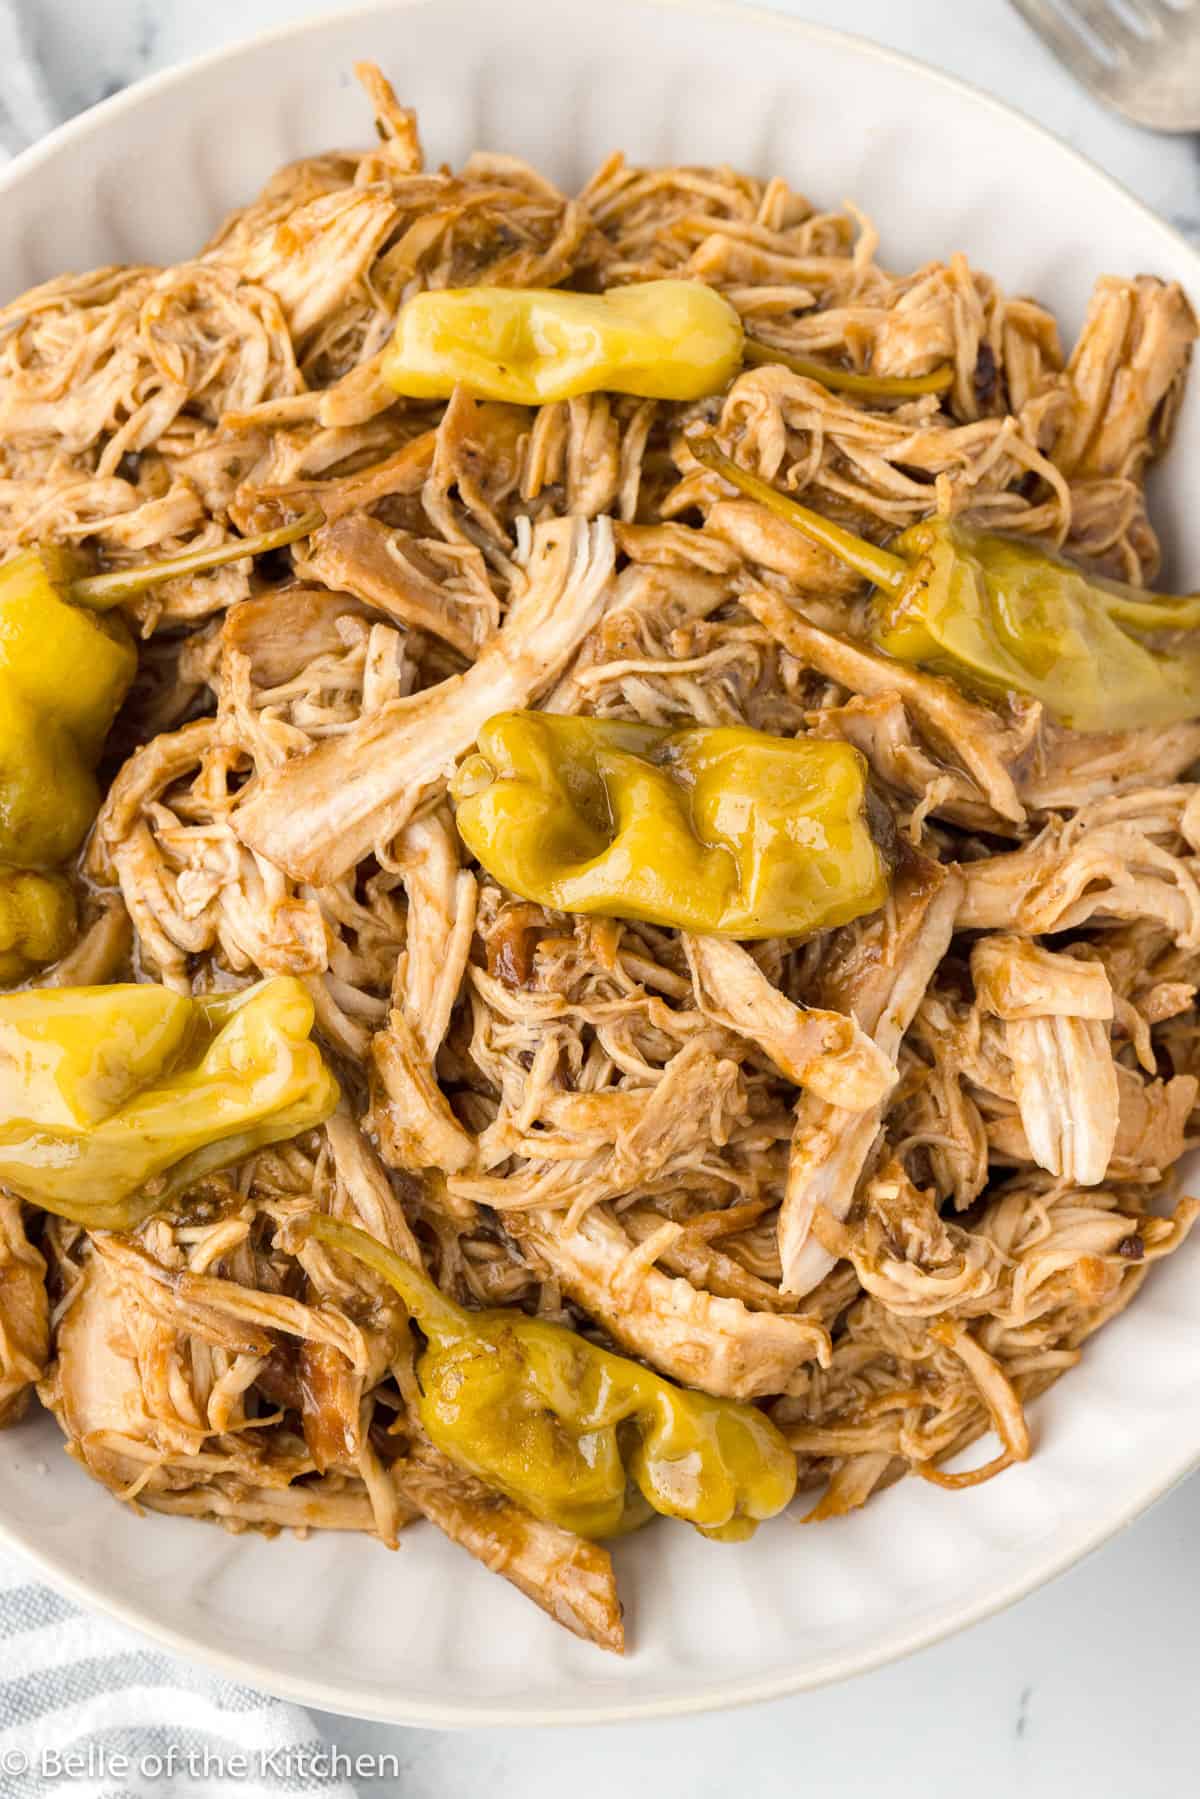 shredded chicken and peperoncini peppers.